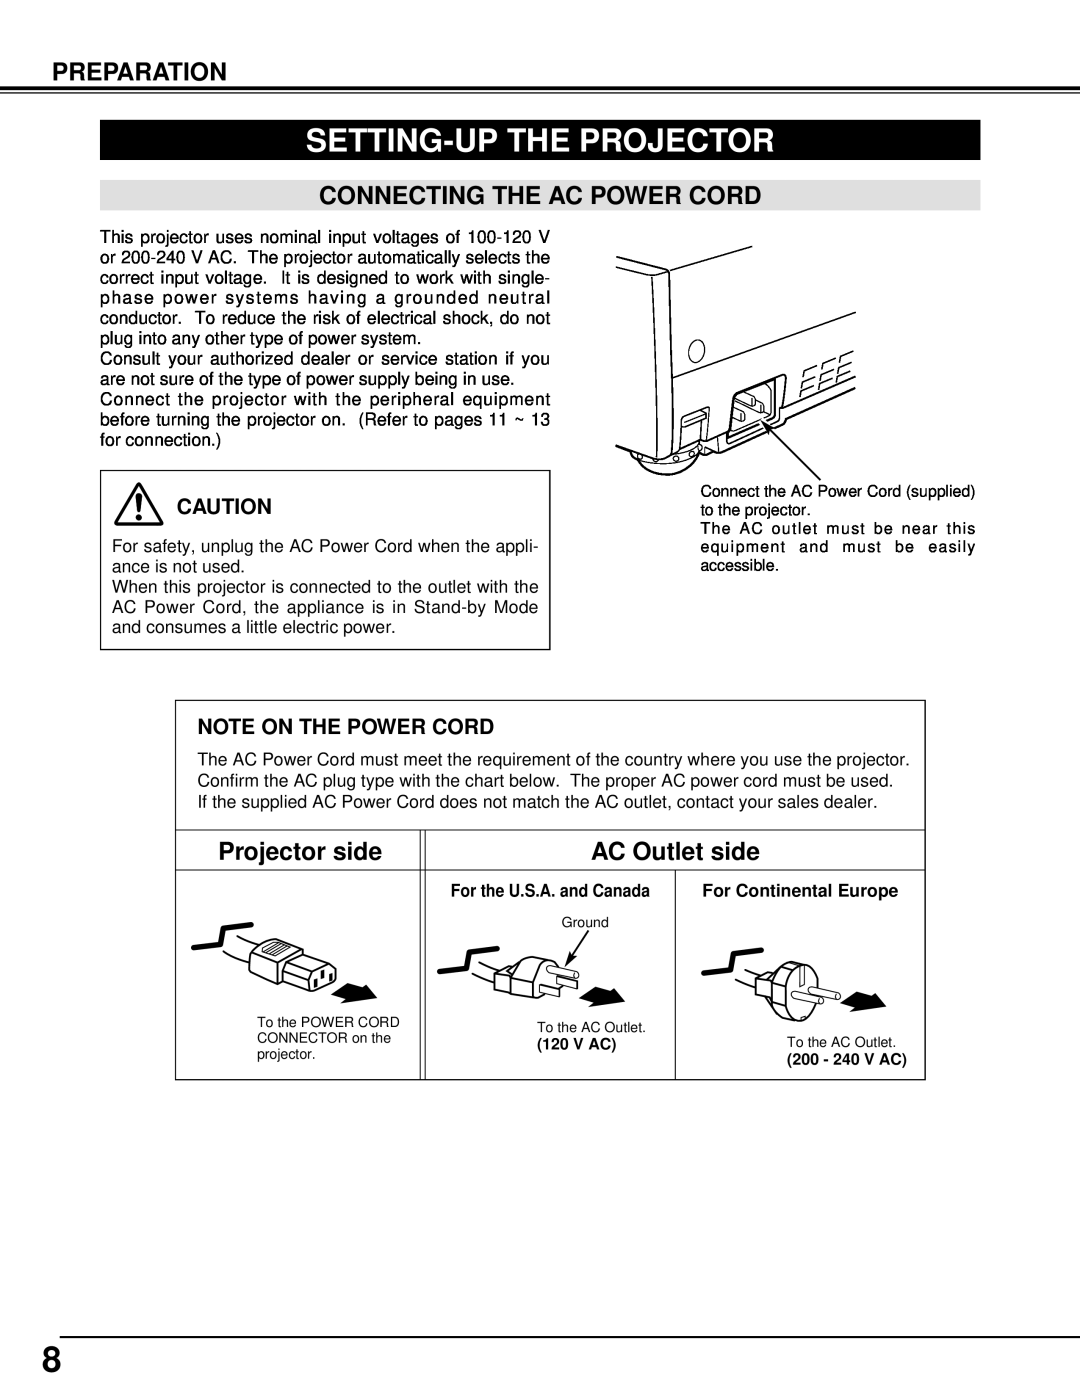 Canon 5100 owner manual Setting-Up The Projector, Connecting The Ac Power Cord, Projector side, AC Outlet side, Preparation 